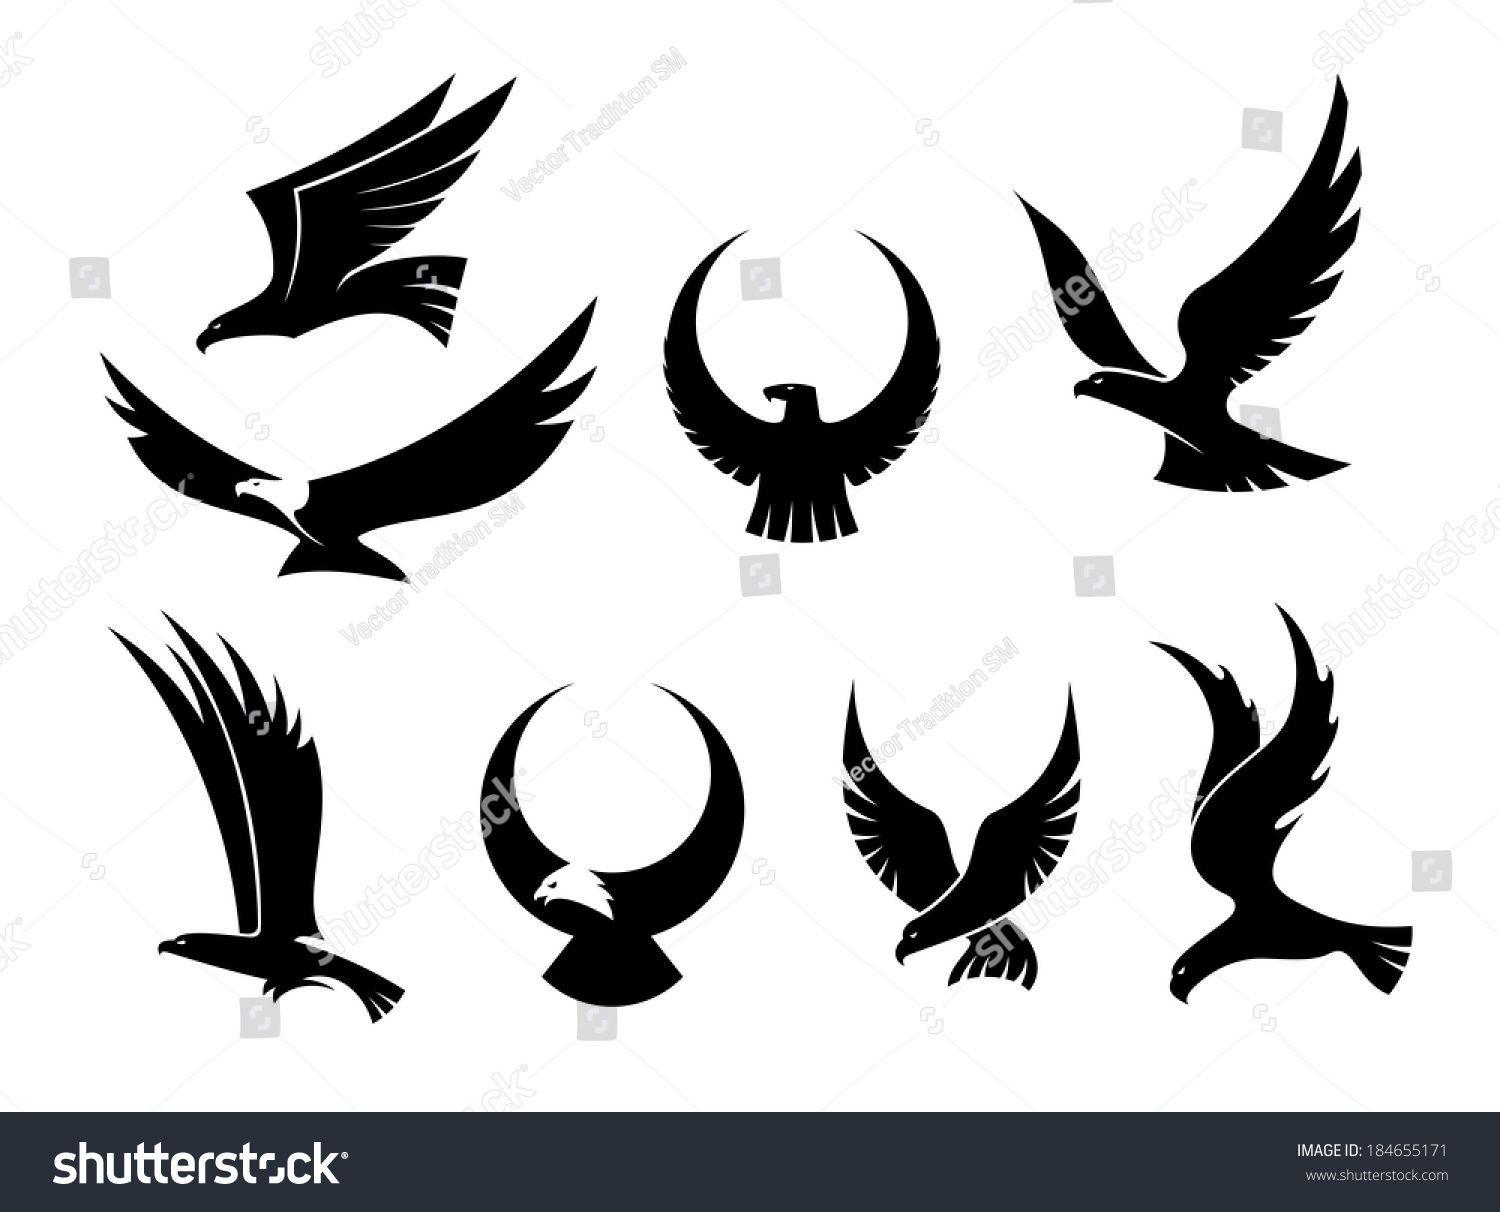 Hunting Eagle Logo - Set of black silhouettes of graceful flying eagles logo with their ...